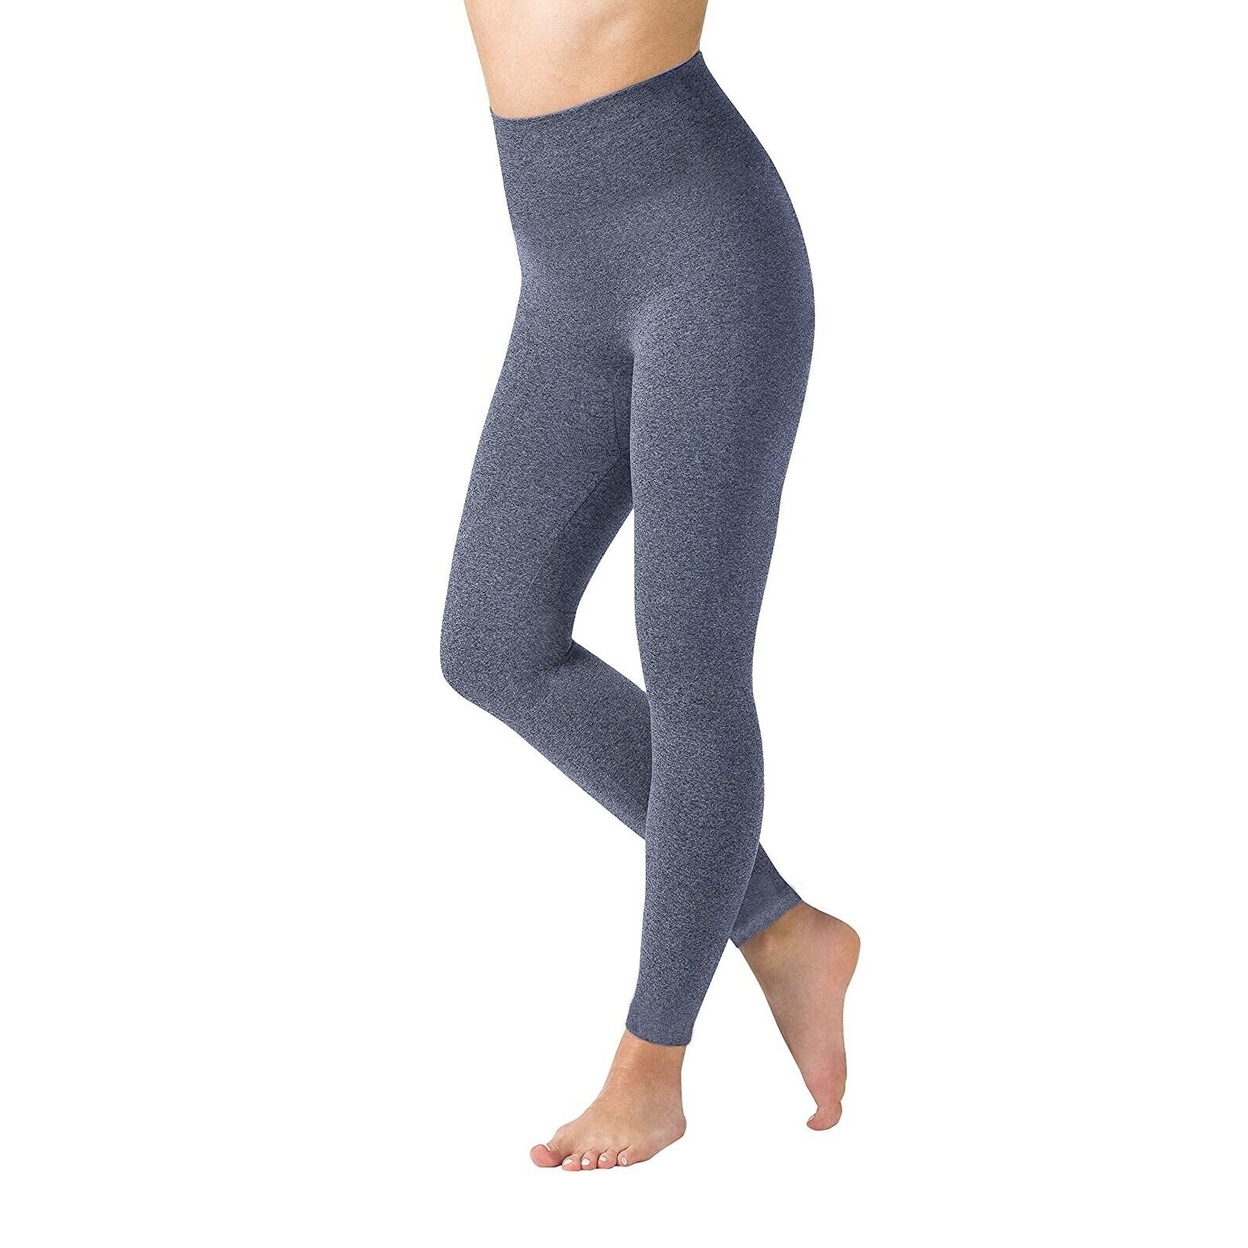 Multi-Packs Women High Waisted Fleece Lined Marled Leggings Ultra Soft Warm Pant - Charcoal/charcoal, 2, Large